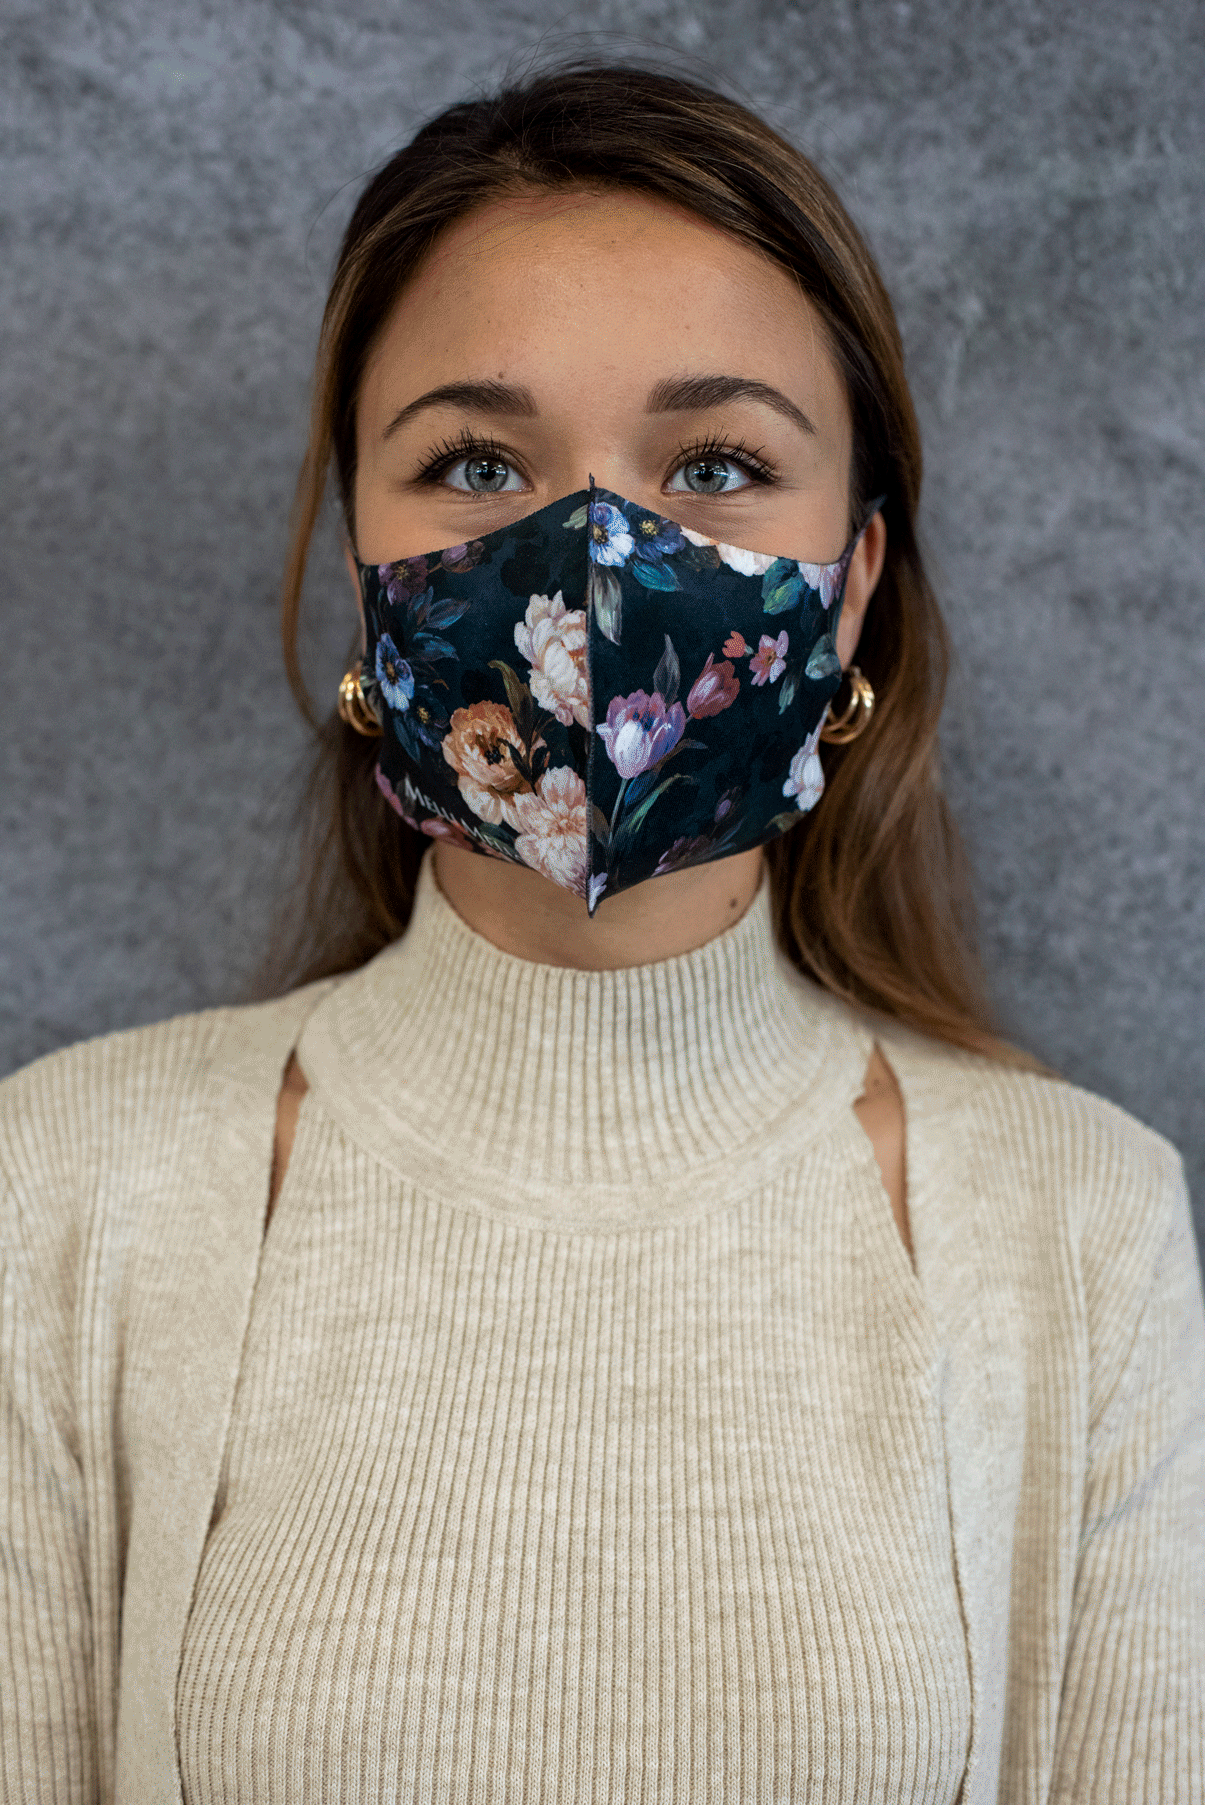 Melli Mello steal the night dark floral mouth mask high quality waterproof UV protection Air filtration PM2.5 anti bacterial facemask with air filtration 180 view